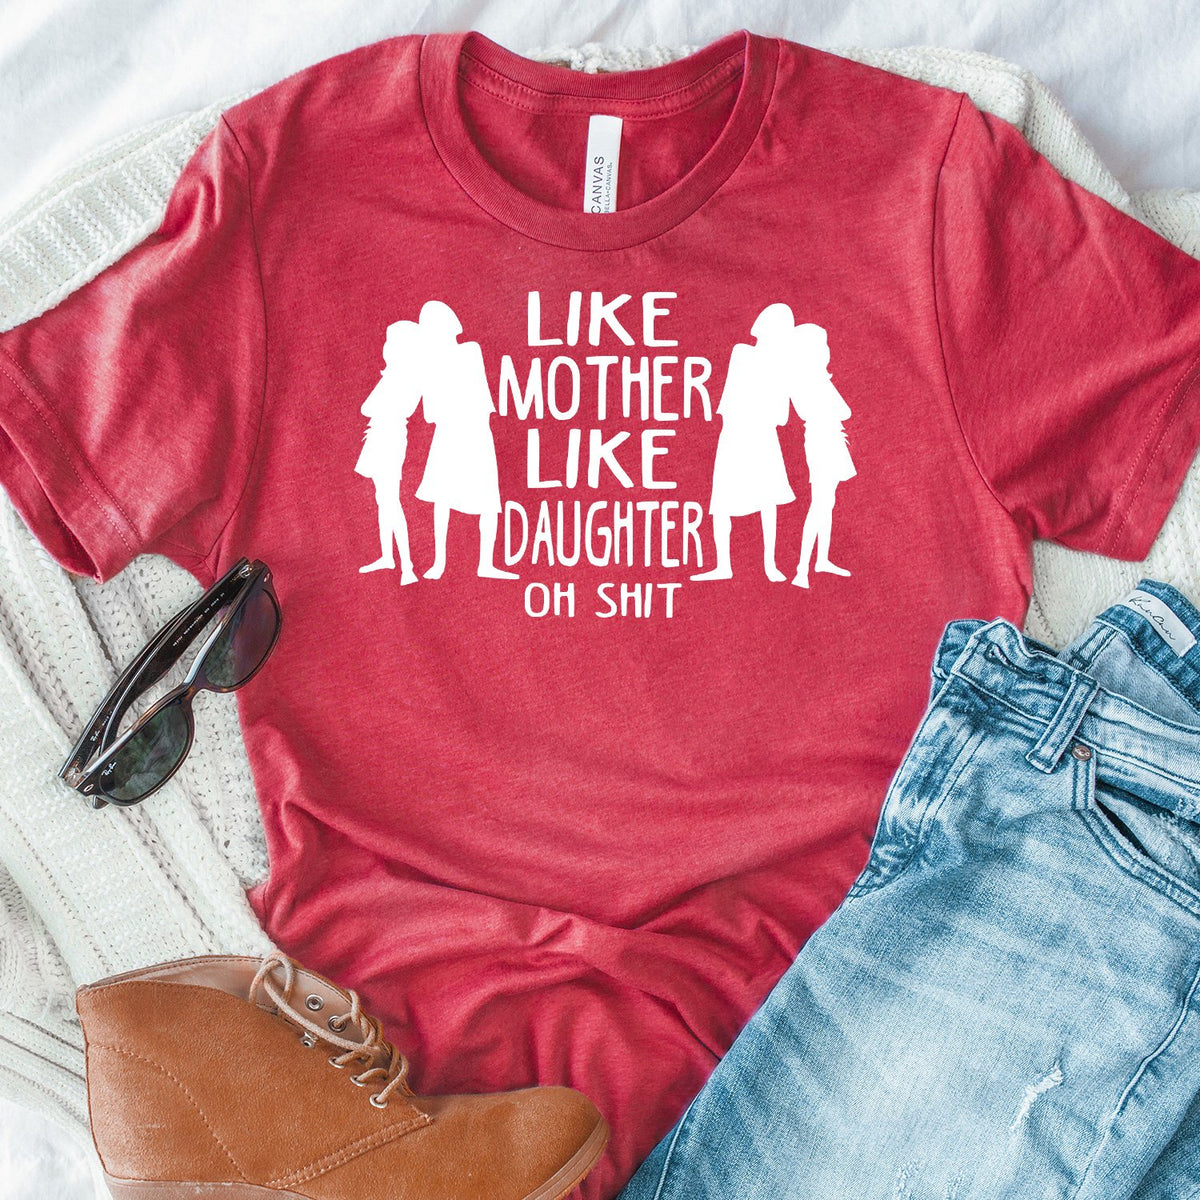 Like Mother Like Daughter Oh Shit - Short Sleeve Tee Shirt